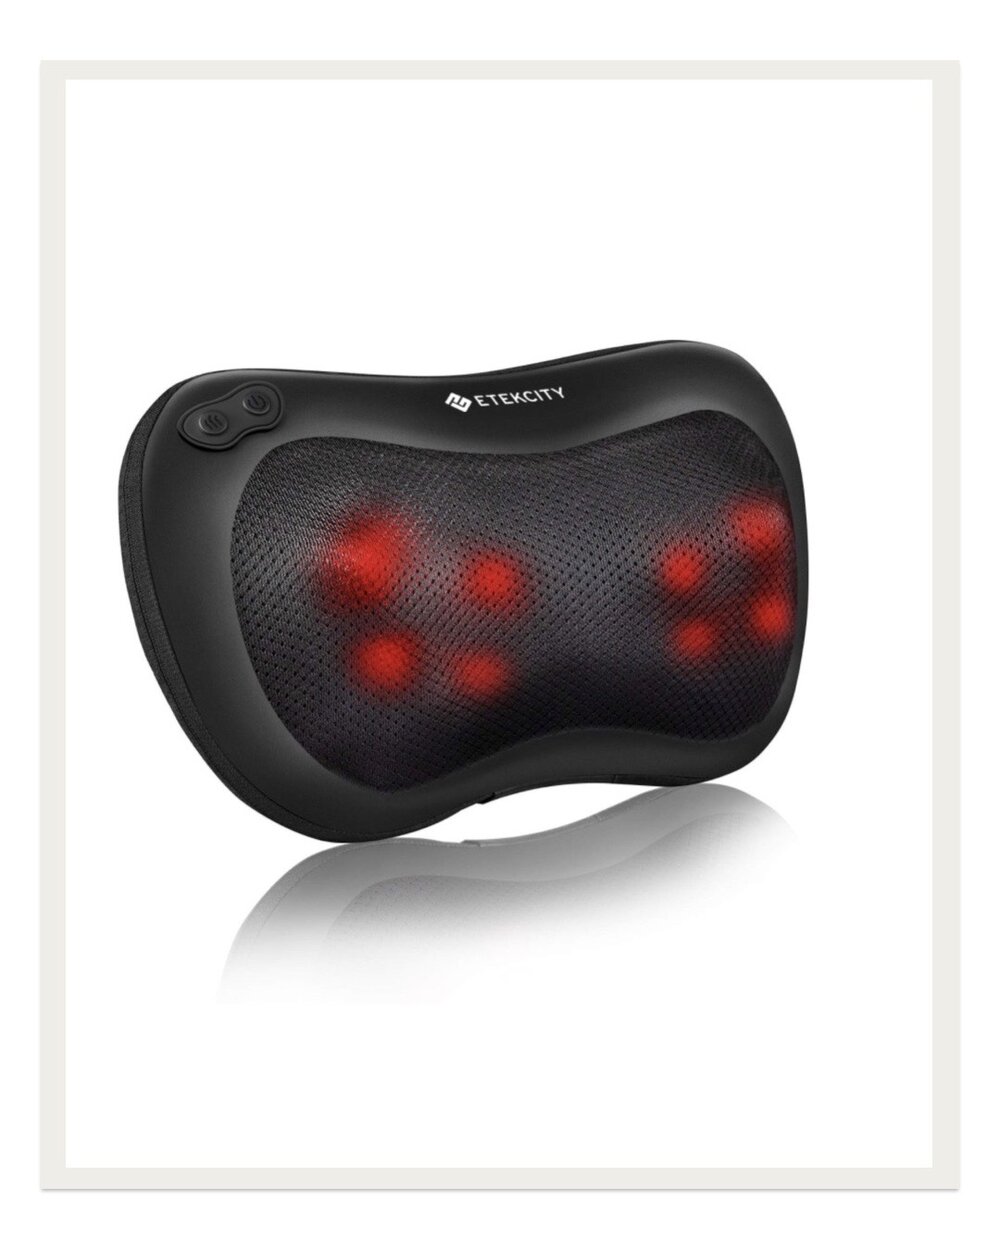 This affordable at-home back neck massager was recommended by one of my favorite masseuses and it has more than lived up to my expectations! I love placing it behind my neck while laying on the couch for the most relaxing and therapeutic indulgence after a day of work!